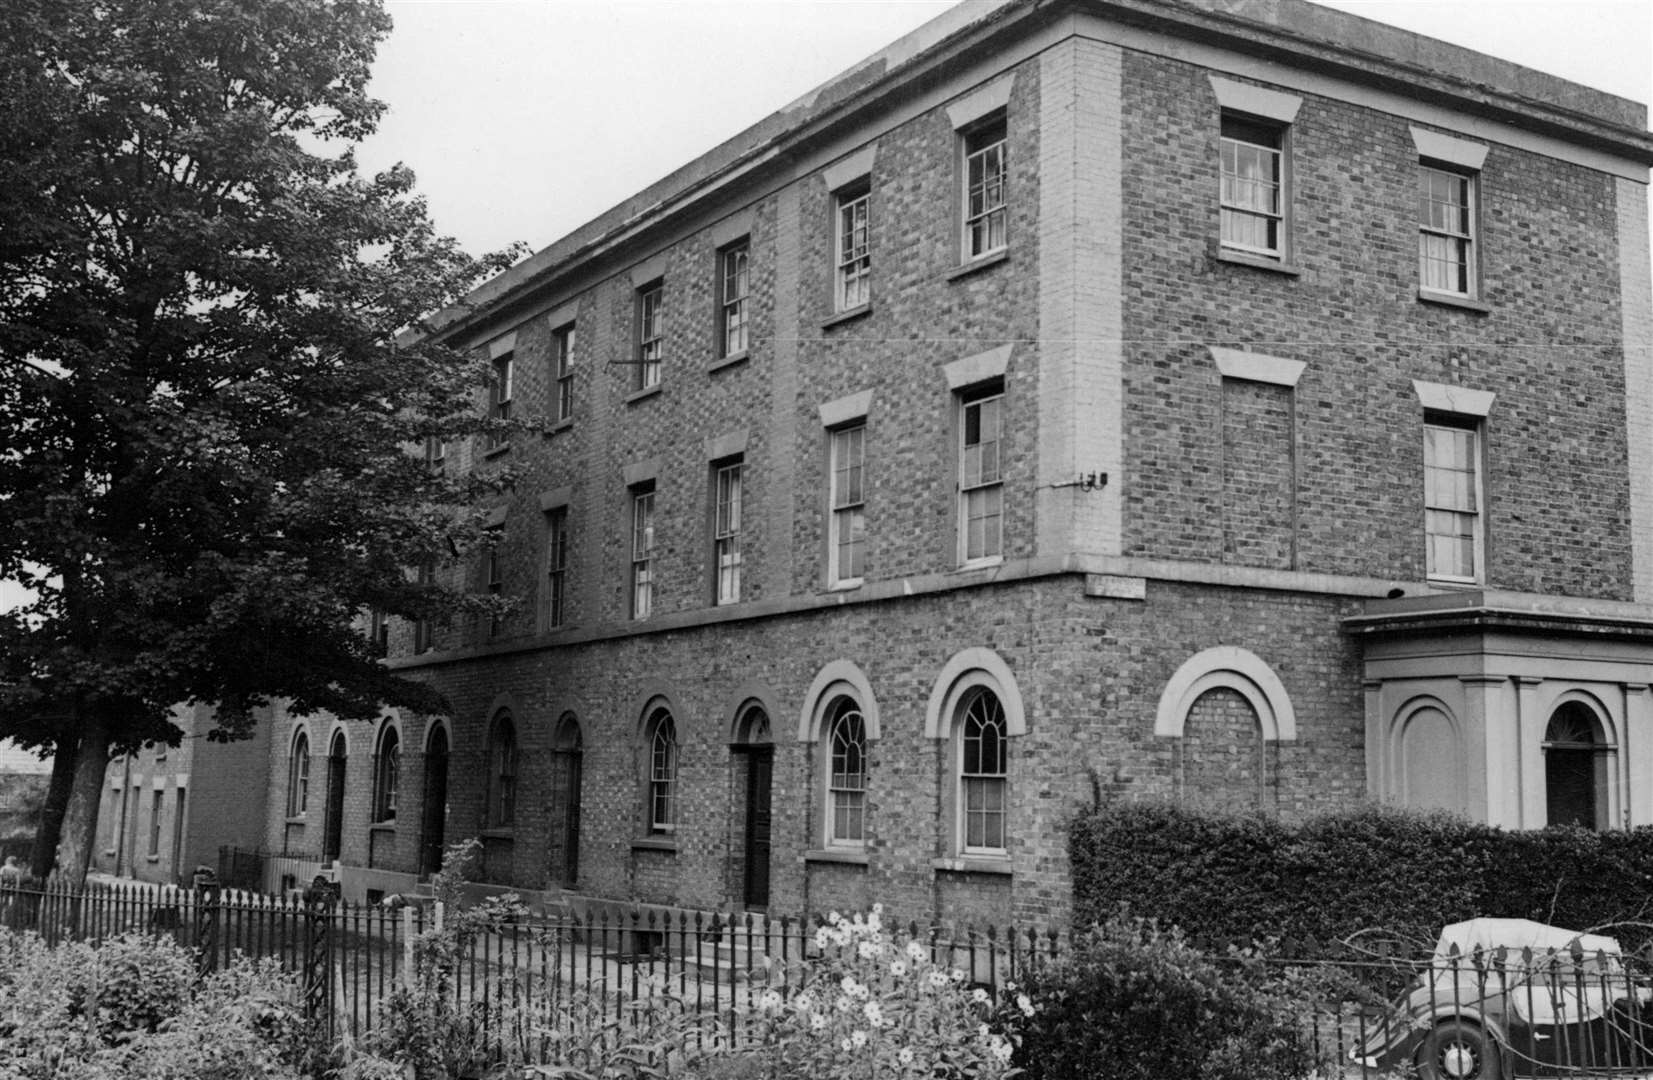 Barrow Hill, 1941. A splendid view showing the Grade II-listed properties reputed to have been built during the Napoleonic Wars to house officers quartered at the nearby barracks. The handsome building is close to the nearby former Prince Albert pub which was recently demolished after being allowed to deteriorate after a fire in 2014. That too was a Grade II-listed property and was just as significantly important as the other listed buildings in the borough